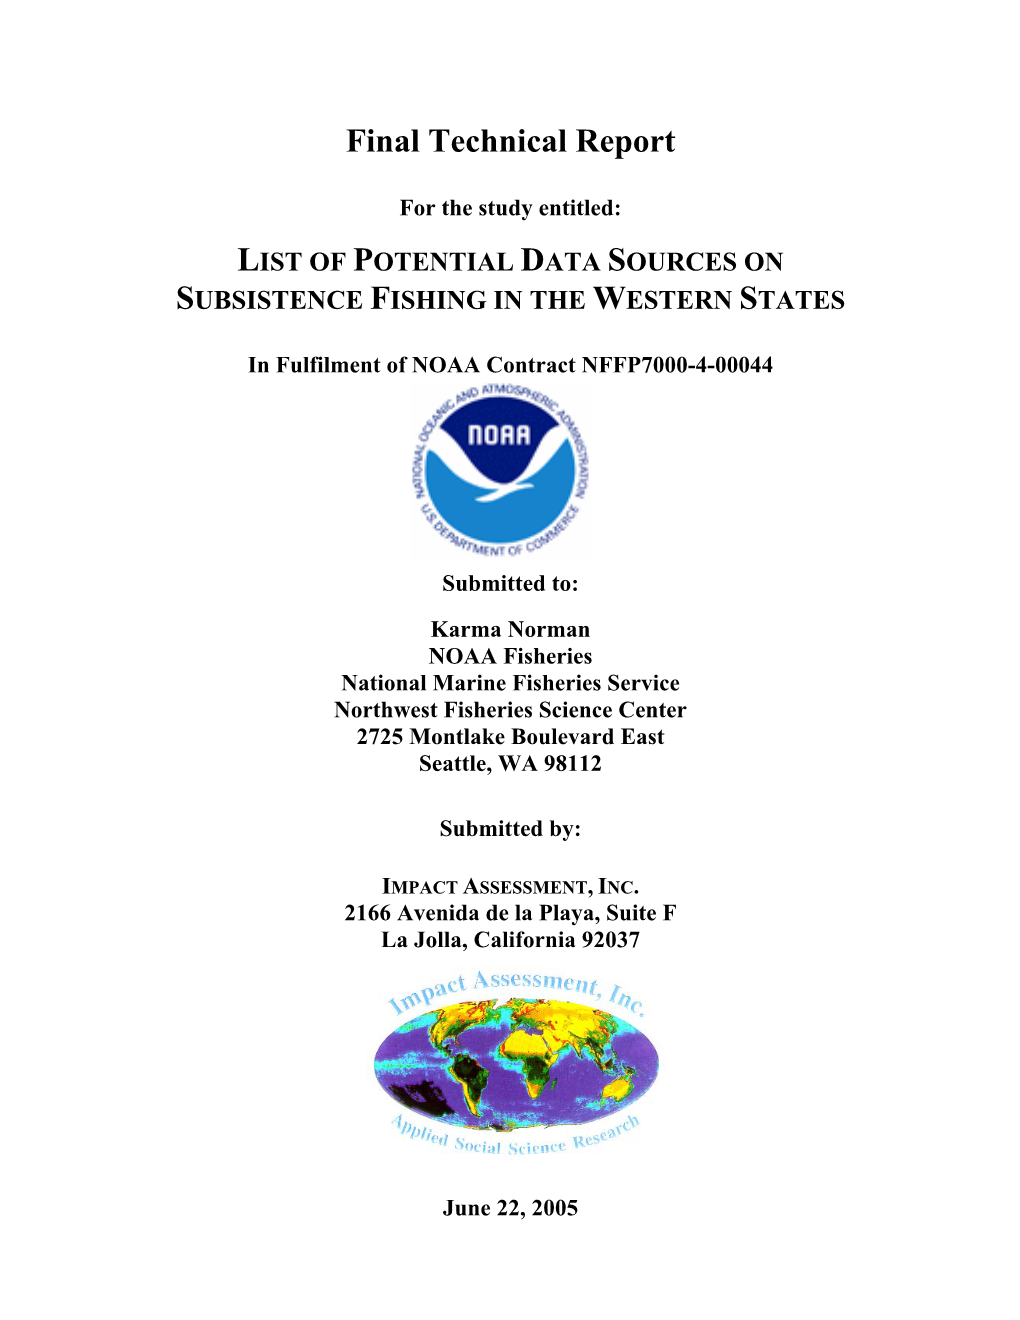 Data Sources on Subsistence Fishing in the Western States